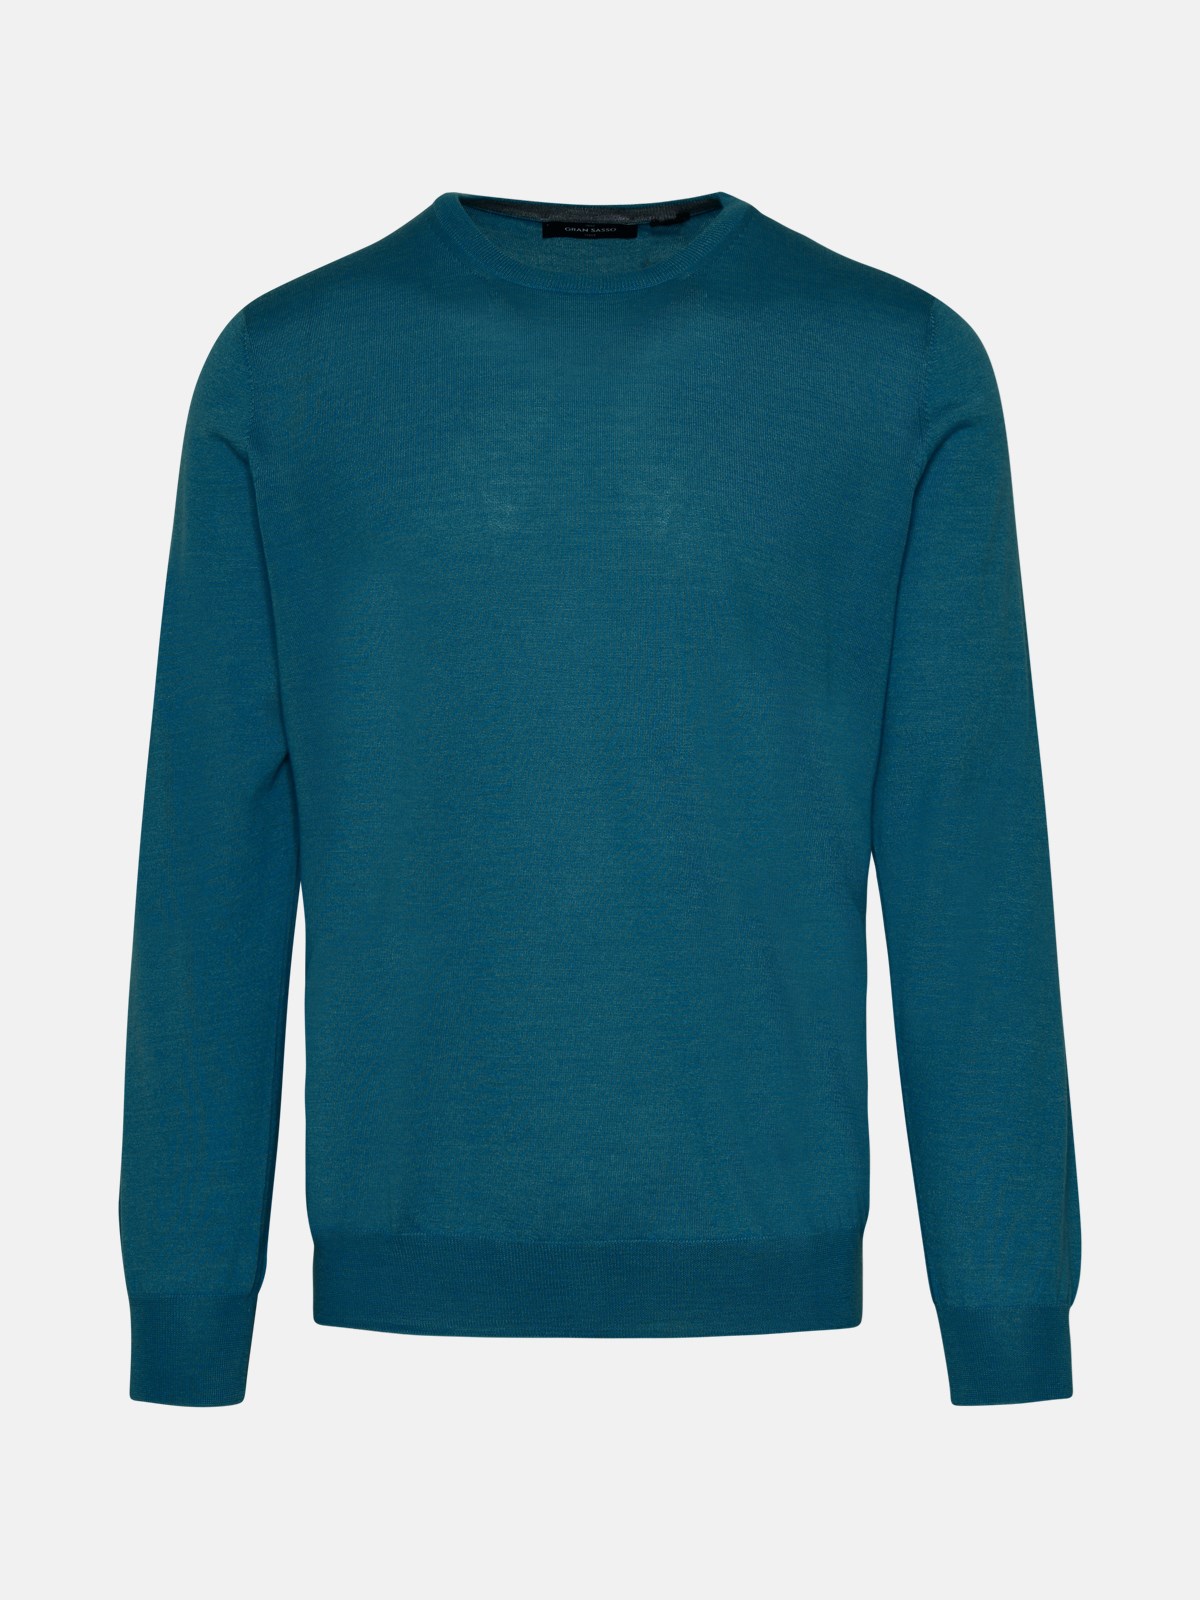 Gran Sasso Turquoise Cashmere Blend Sweater In Light Blue